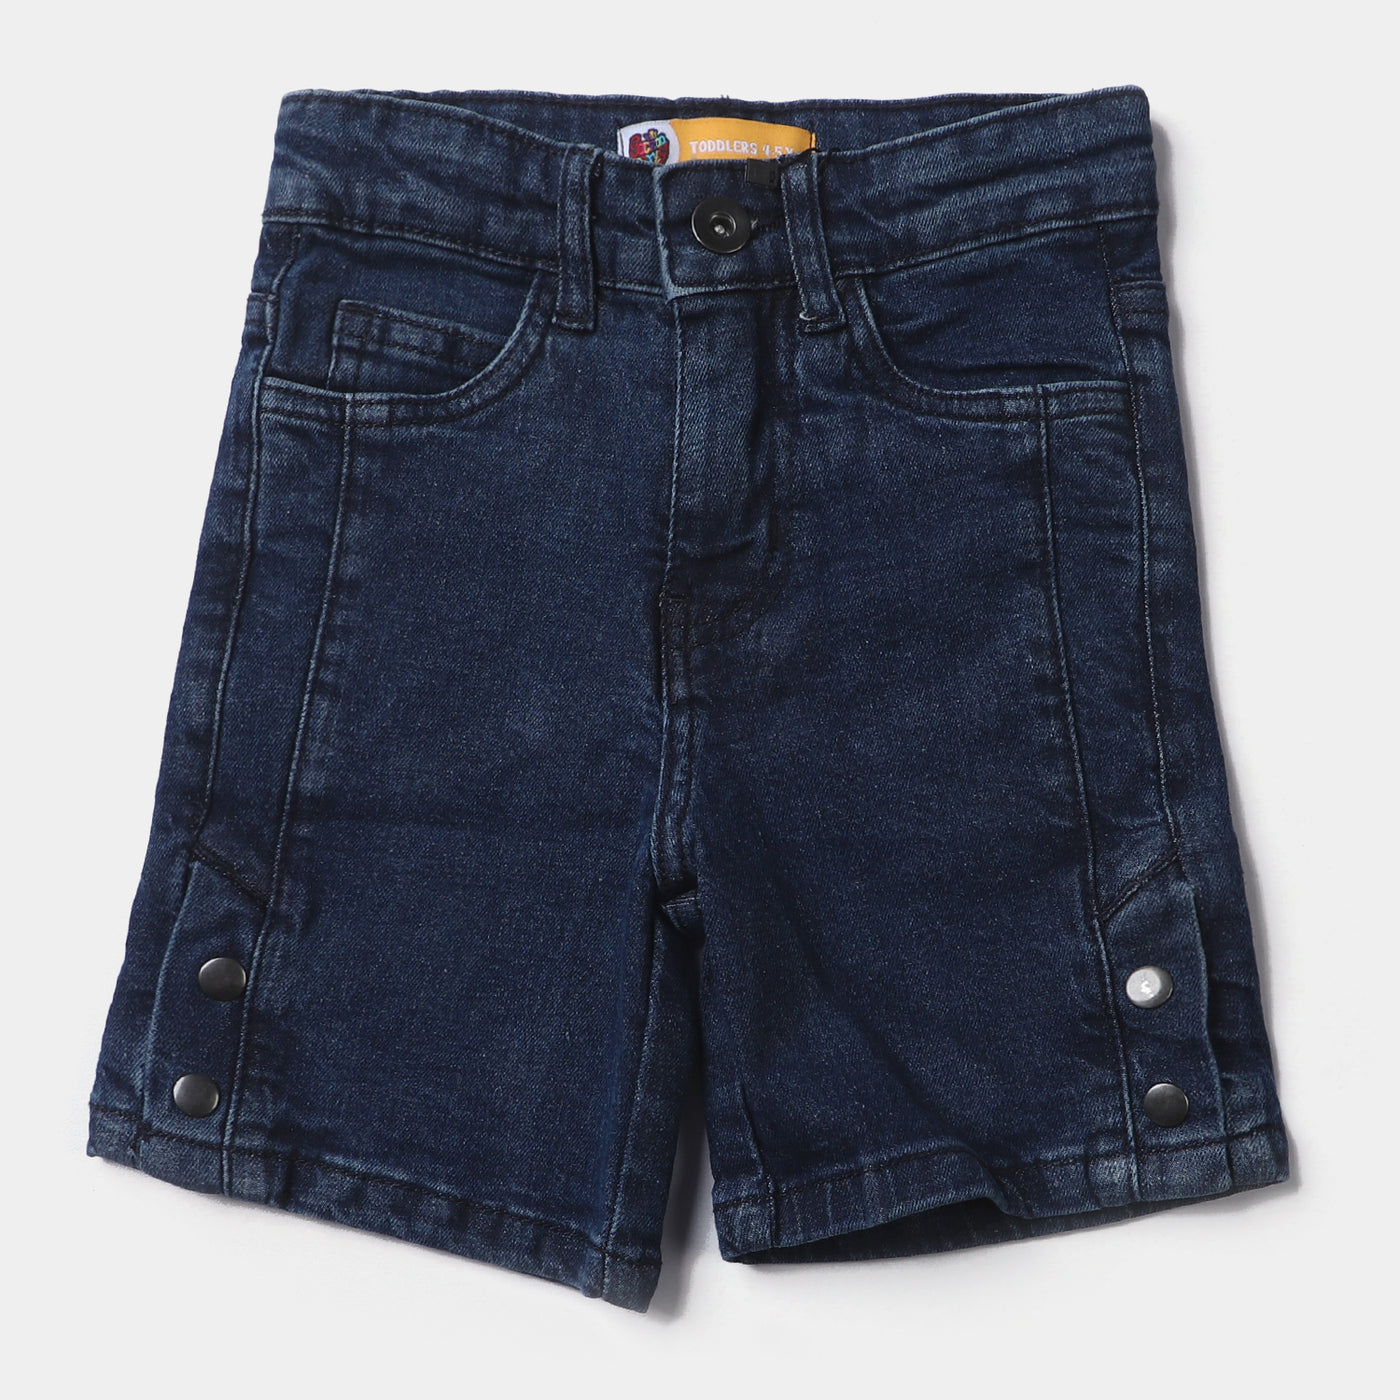 Boys Denim Stretch Short Out Of This World-Mid Blue